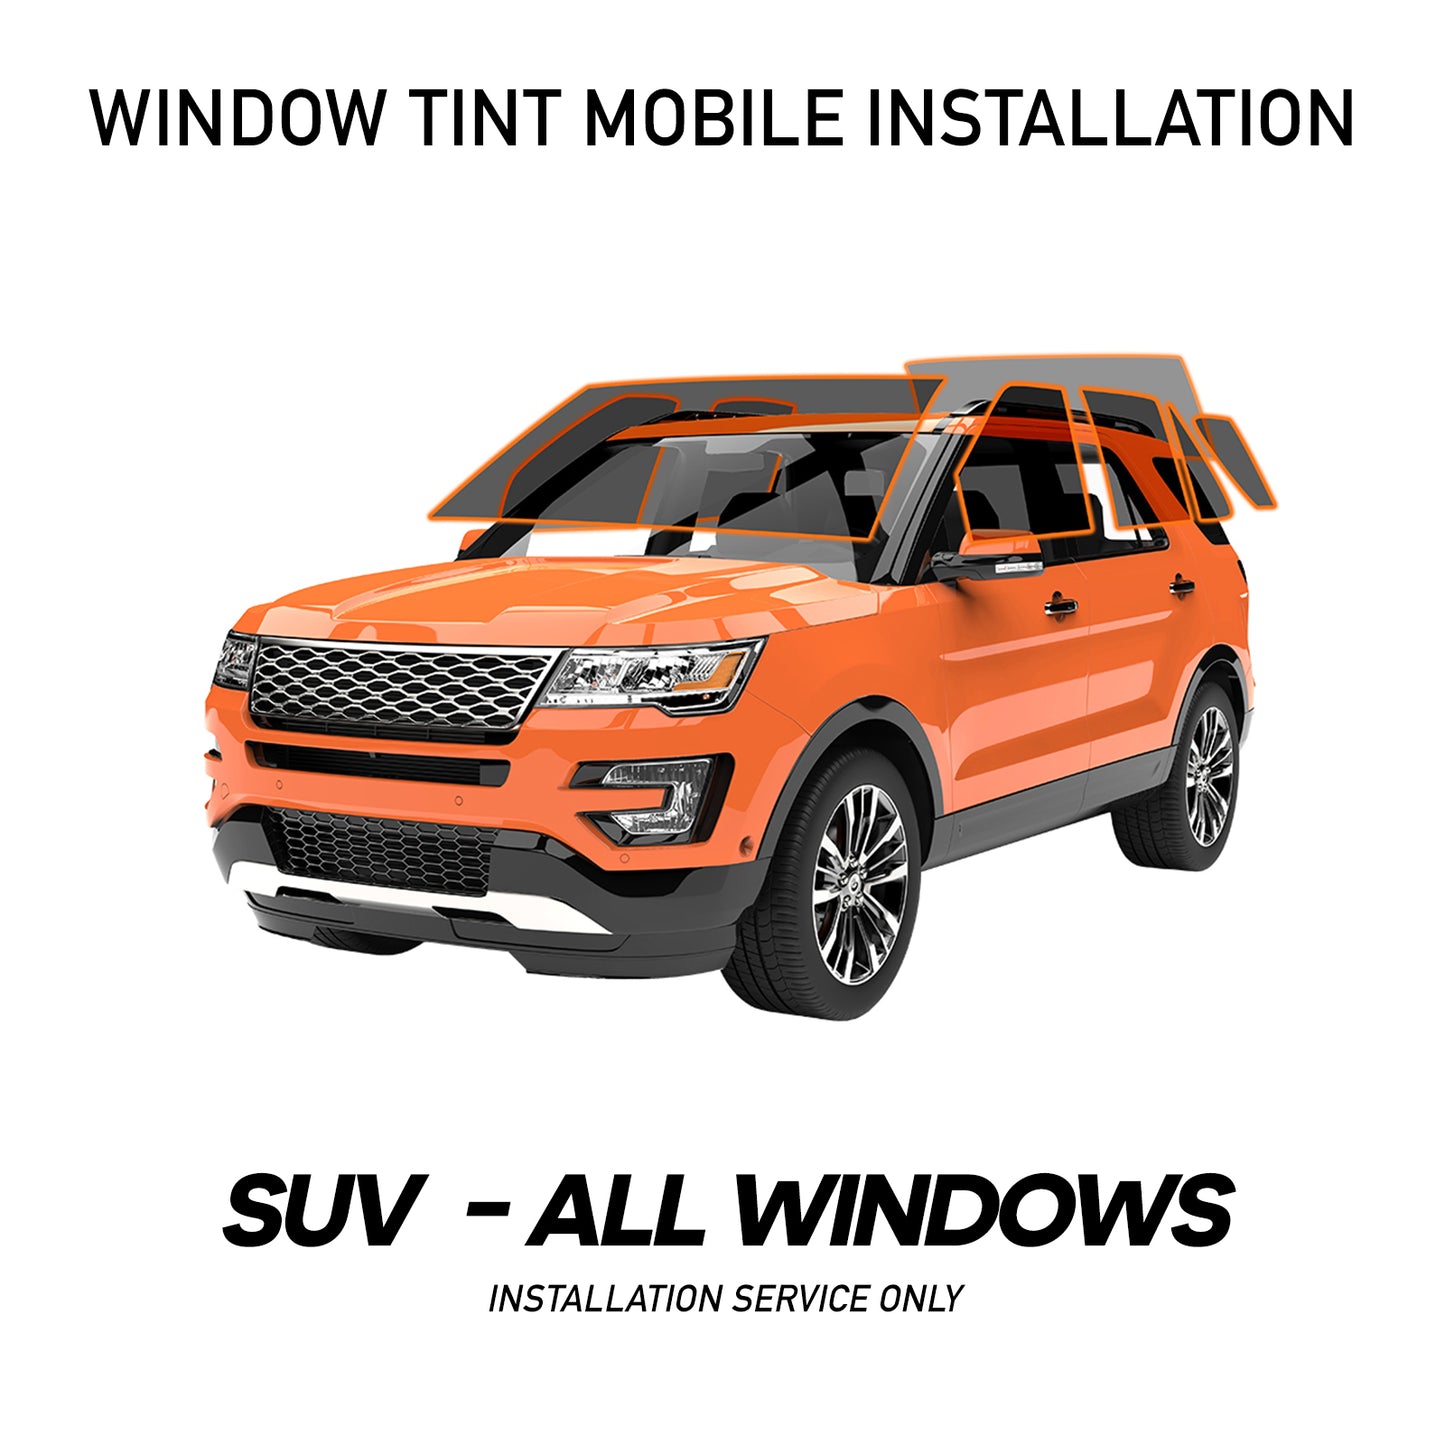 Window Tint Mobile Installation For SUV - All Windows